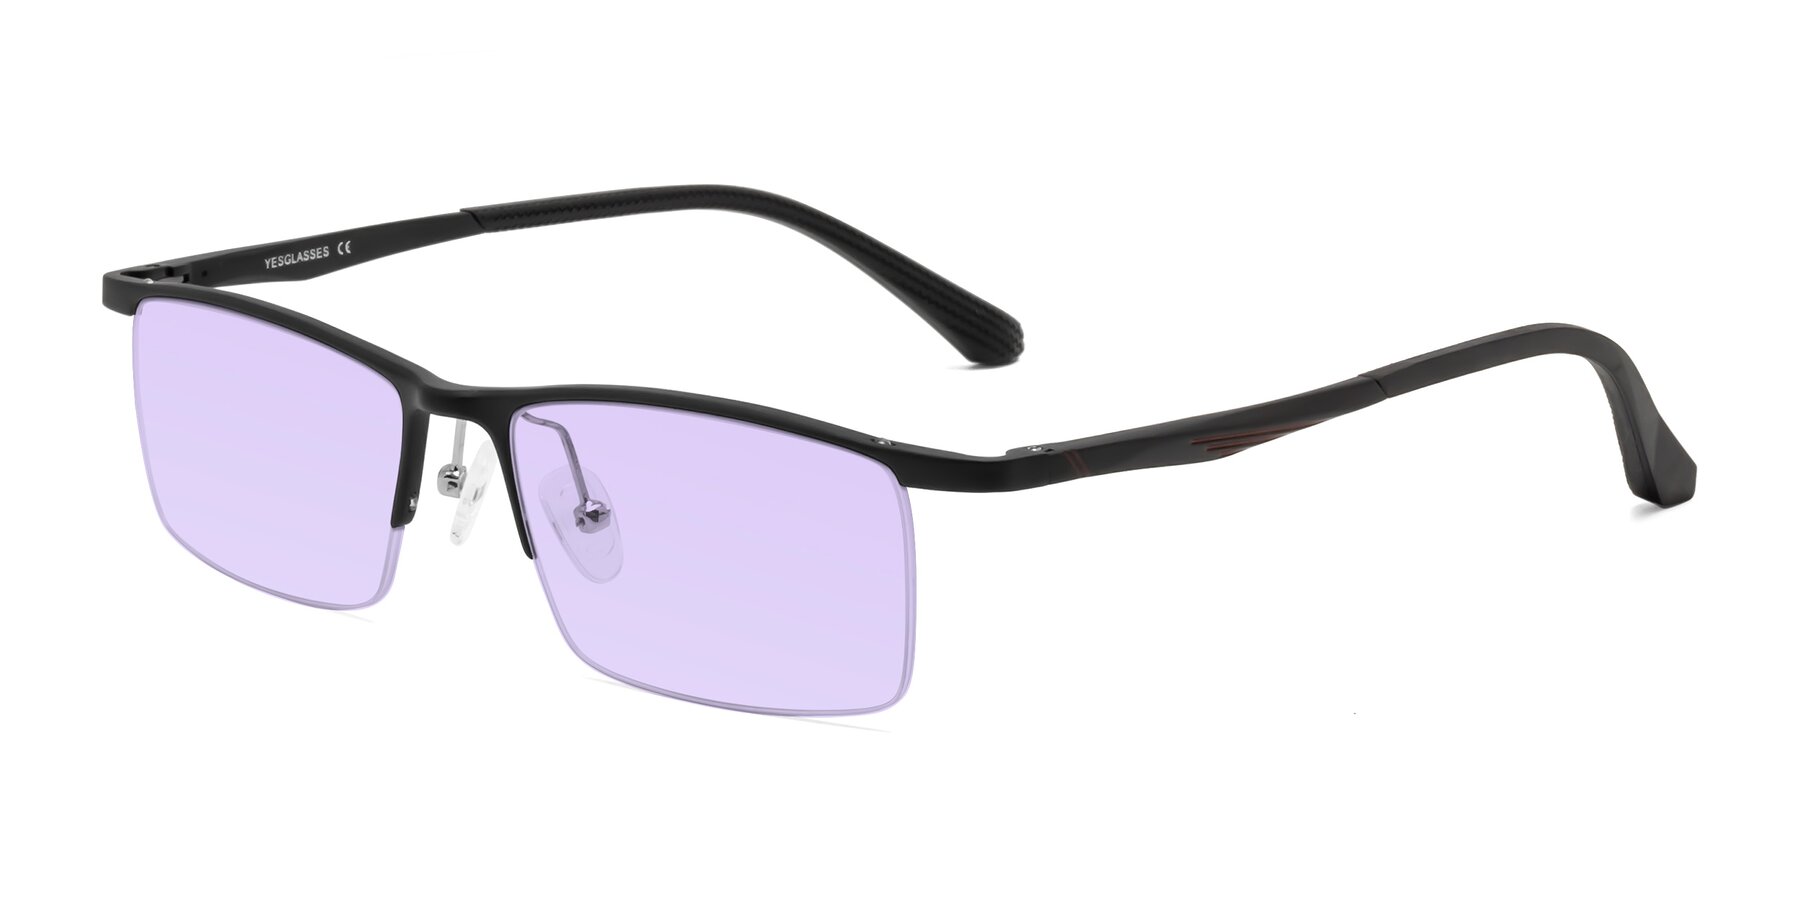 Angle of CX6236 in Black with Light Purple Tinted Lenses